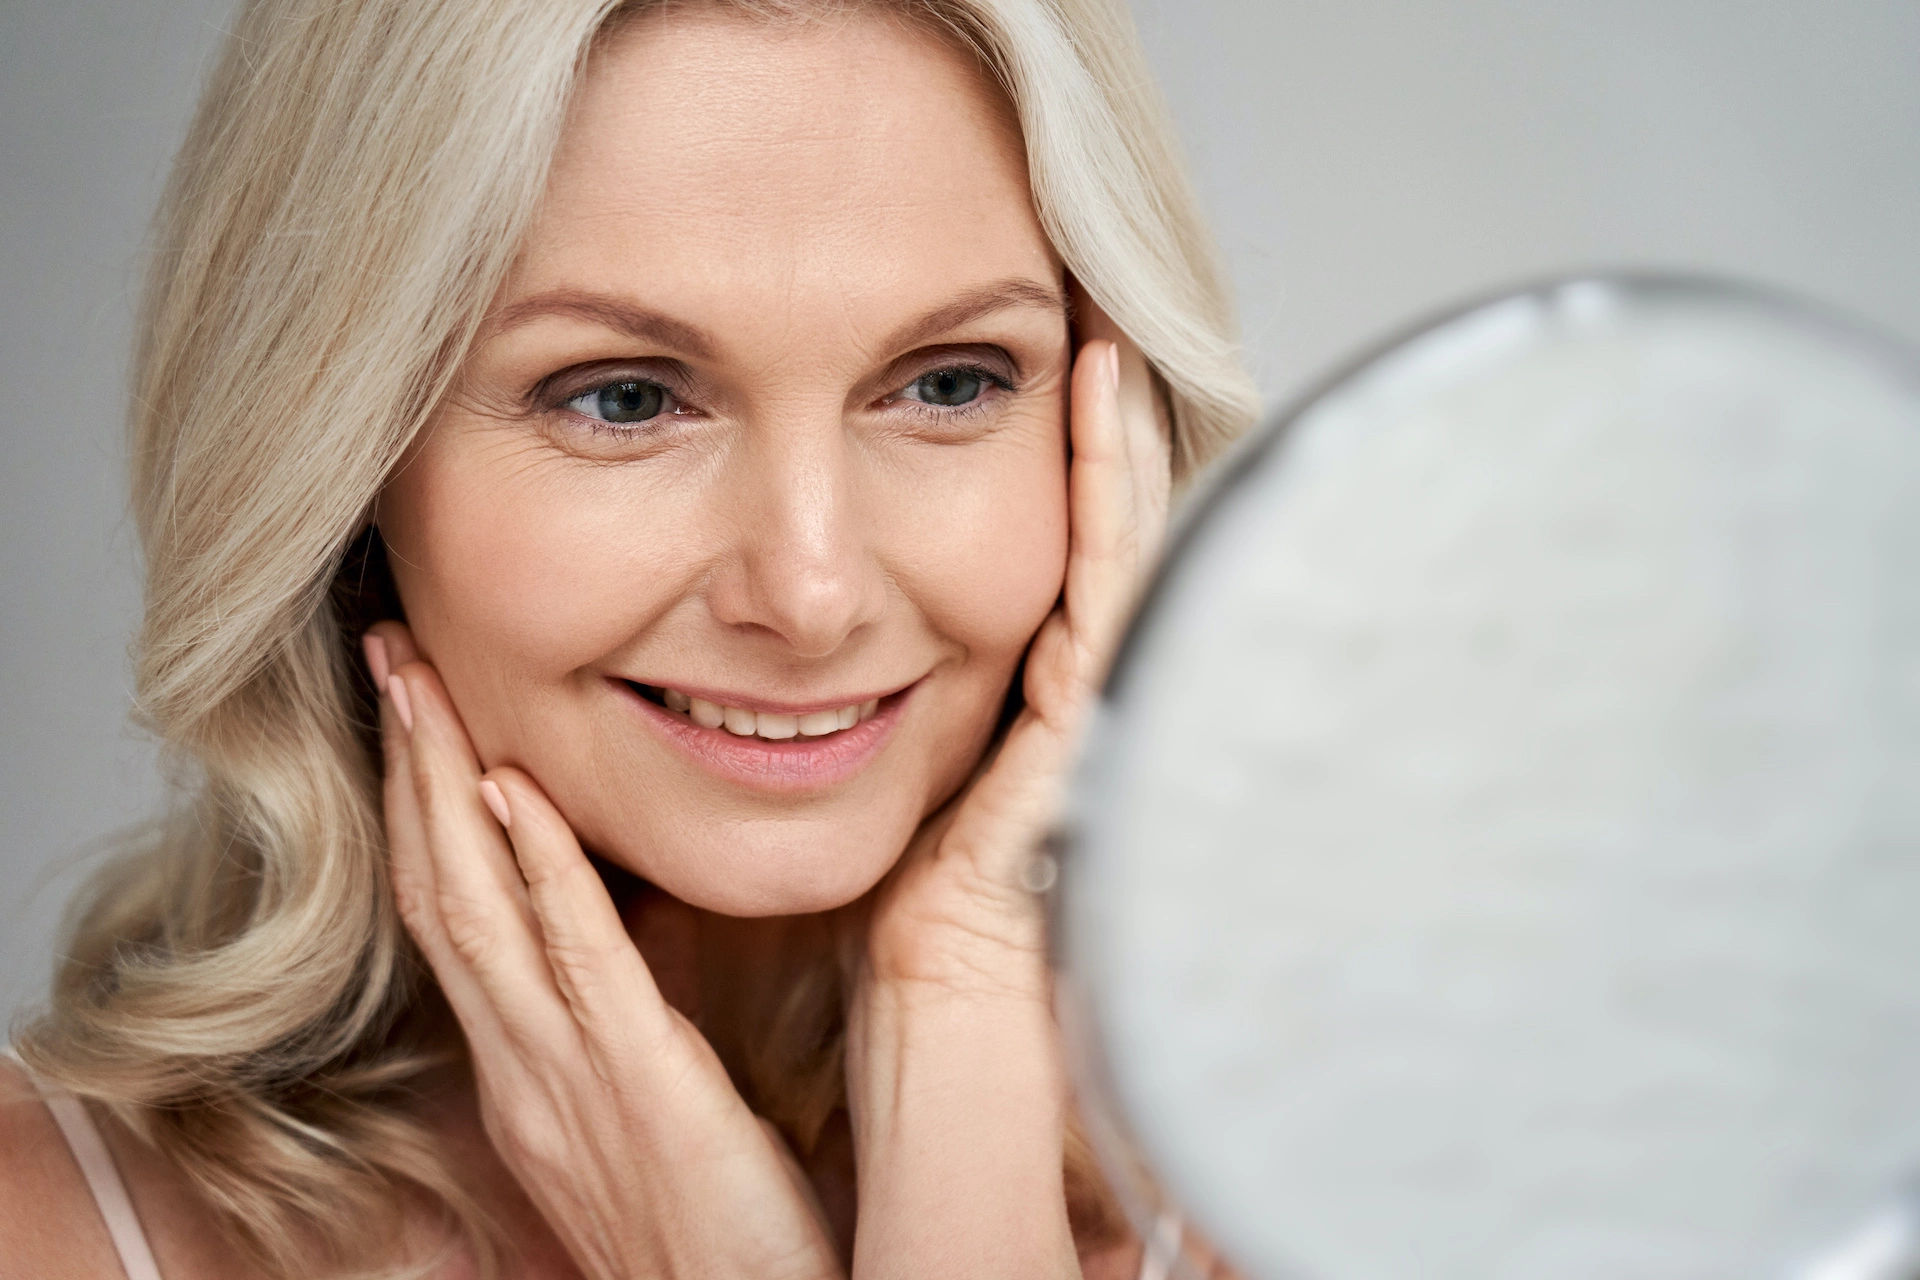 Anti-aging skin care tips: A dermatologist's secrets to younger